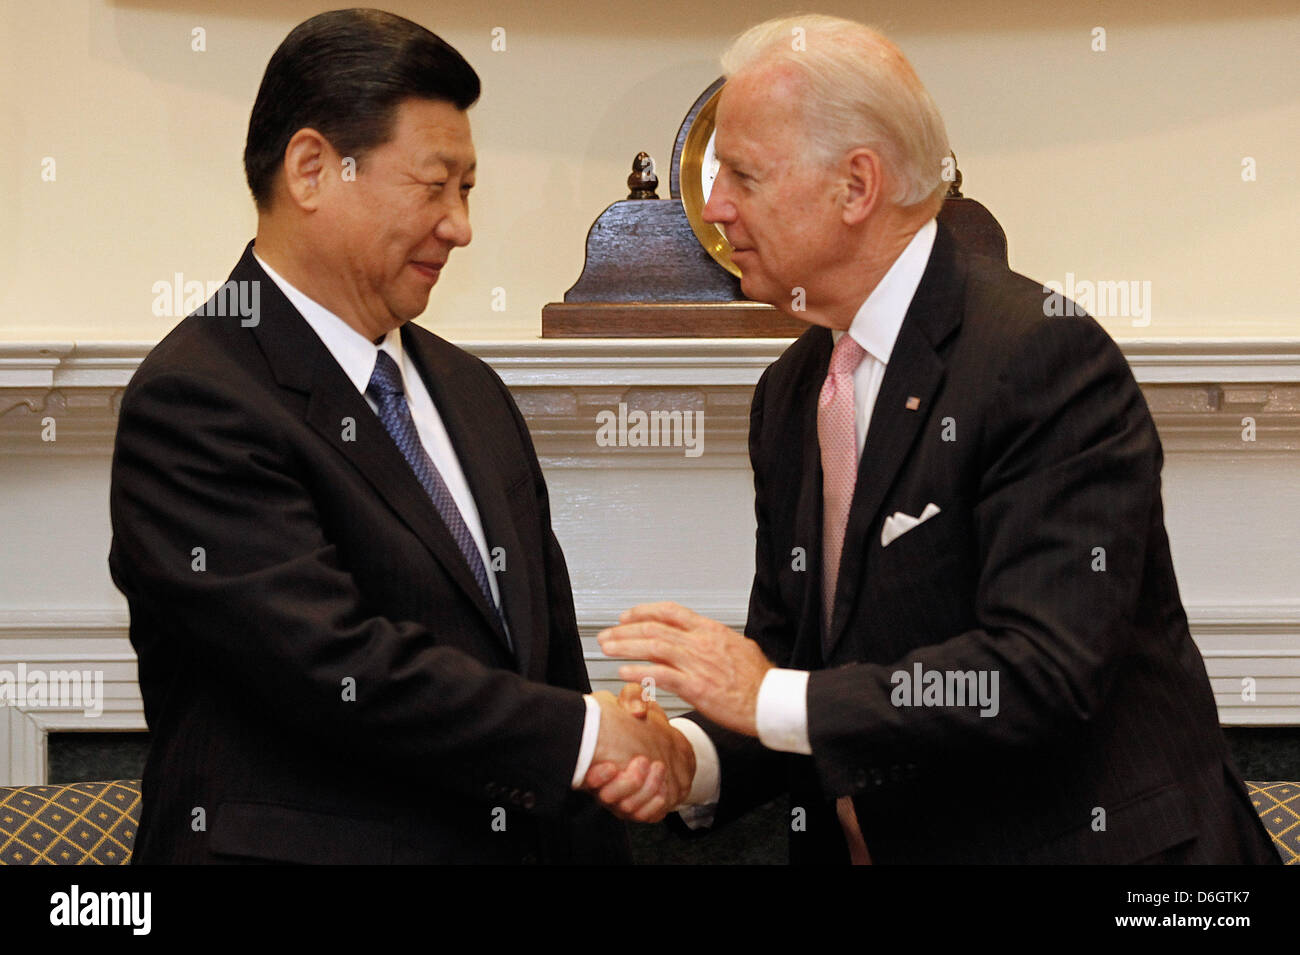 United States Vice President Joe Biden (R) and Vice President Xi Jinping of China shake hands before  an expanded bilateral meeting with other U.S. and Chinese officials in the Roosevelt Room at the White House in Washington, DC, USA, 14 February 2012. While in Washington, Vice President Xi will meet with Biden, President Barack Obama and other senior Administration officials to di Stock Photo